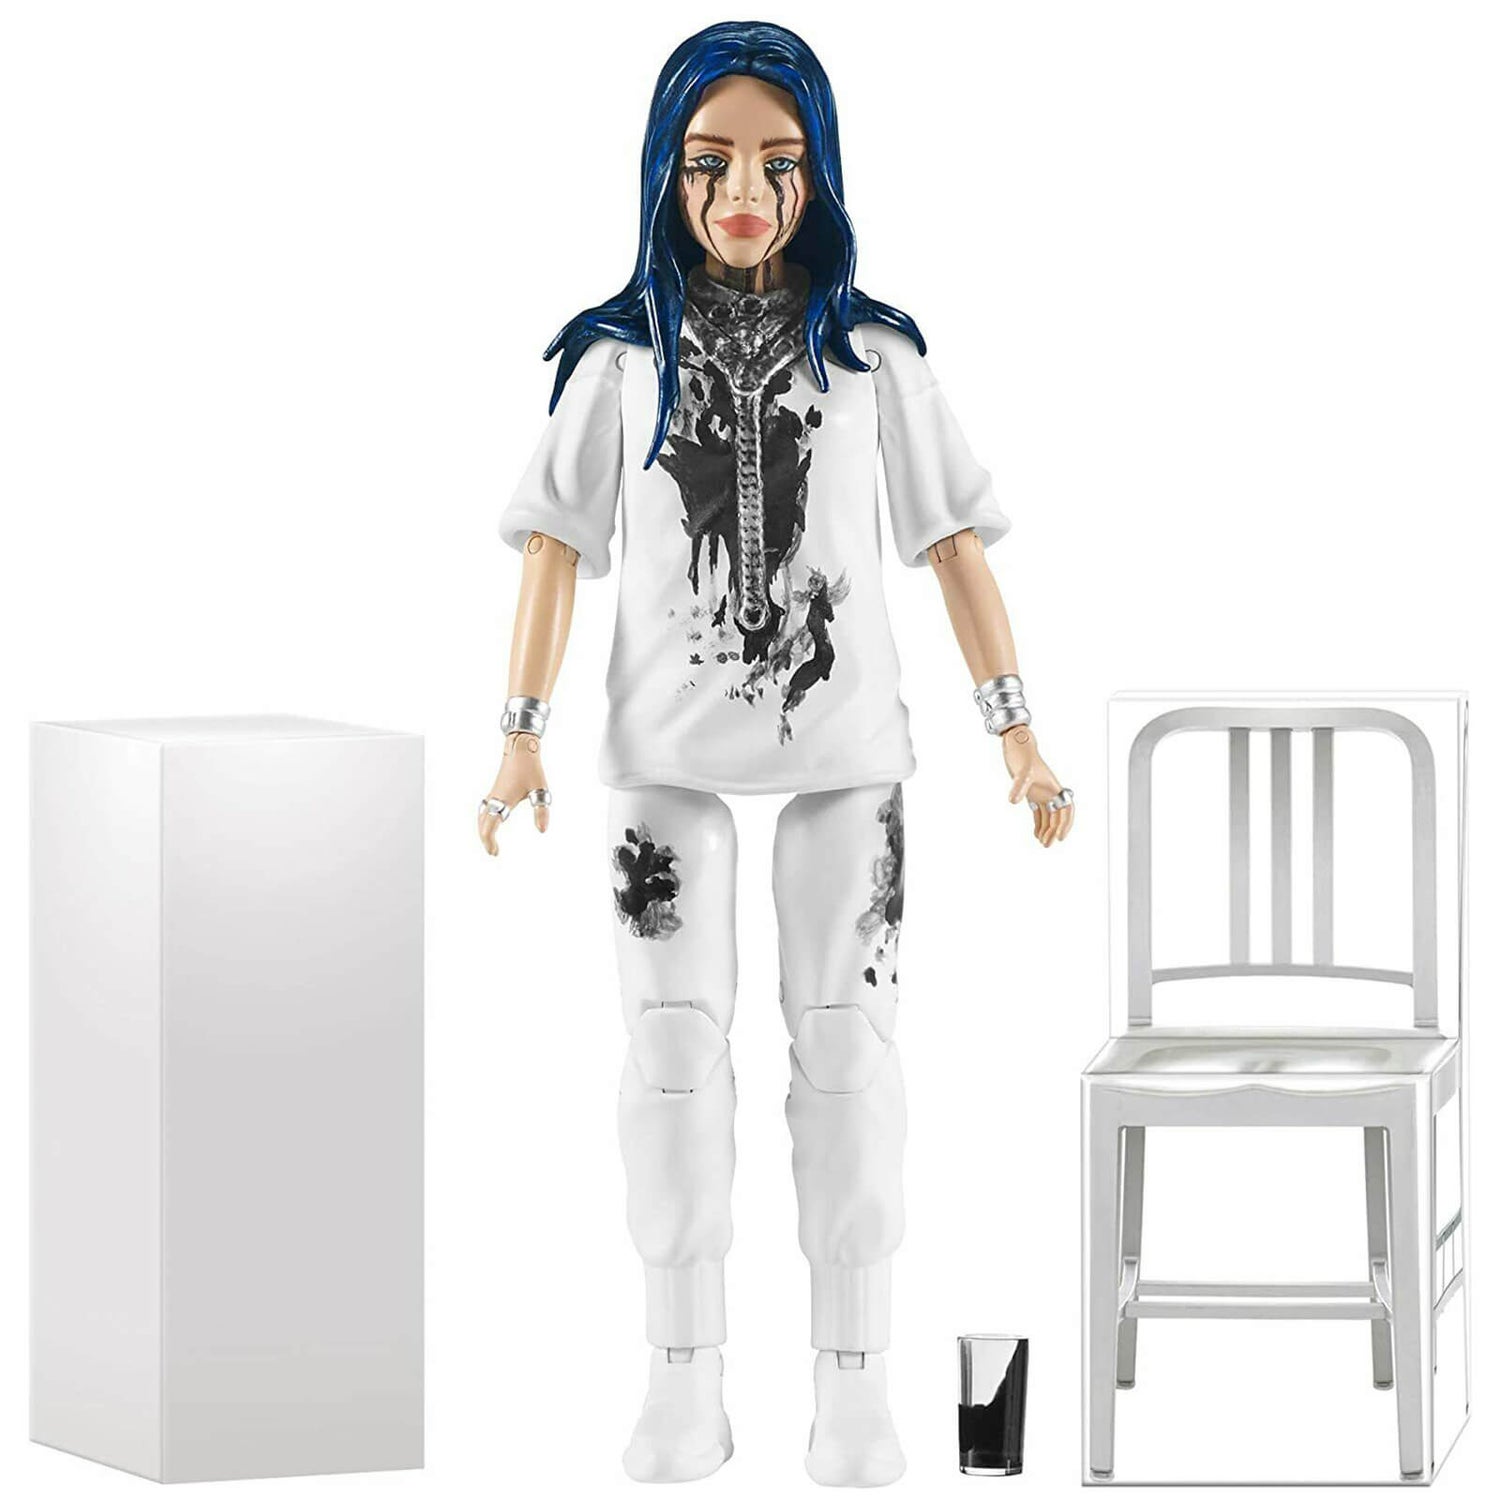 Bandai Billie Eilish 6" Figure (When the Party is Over)